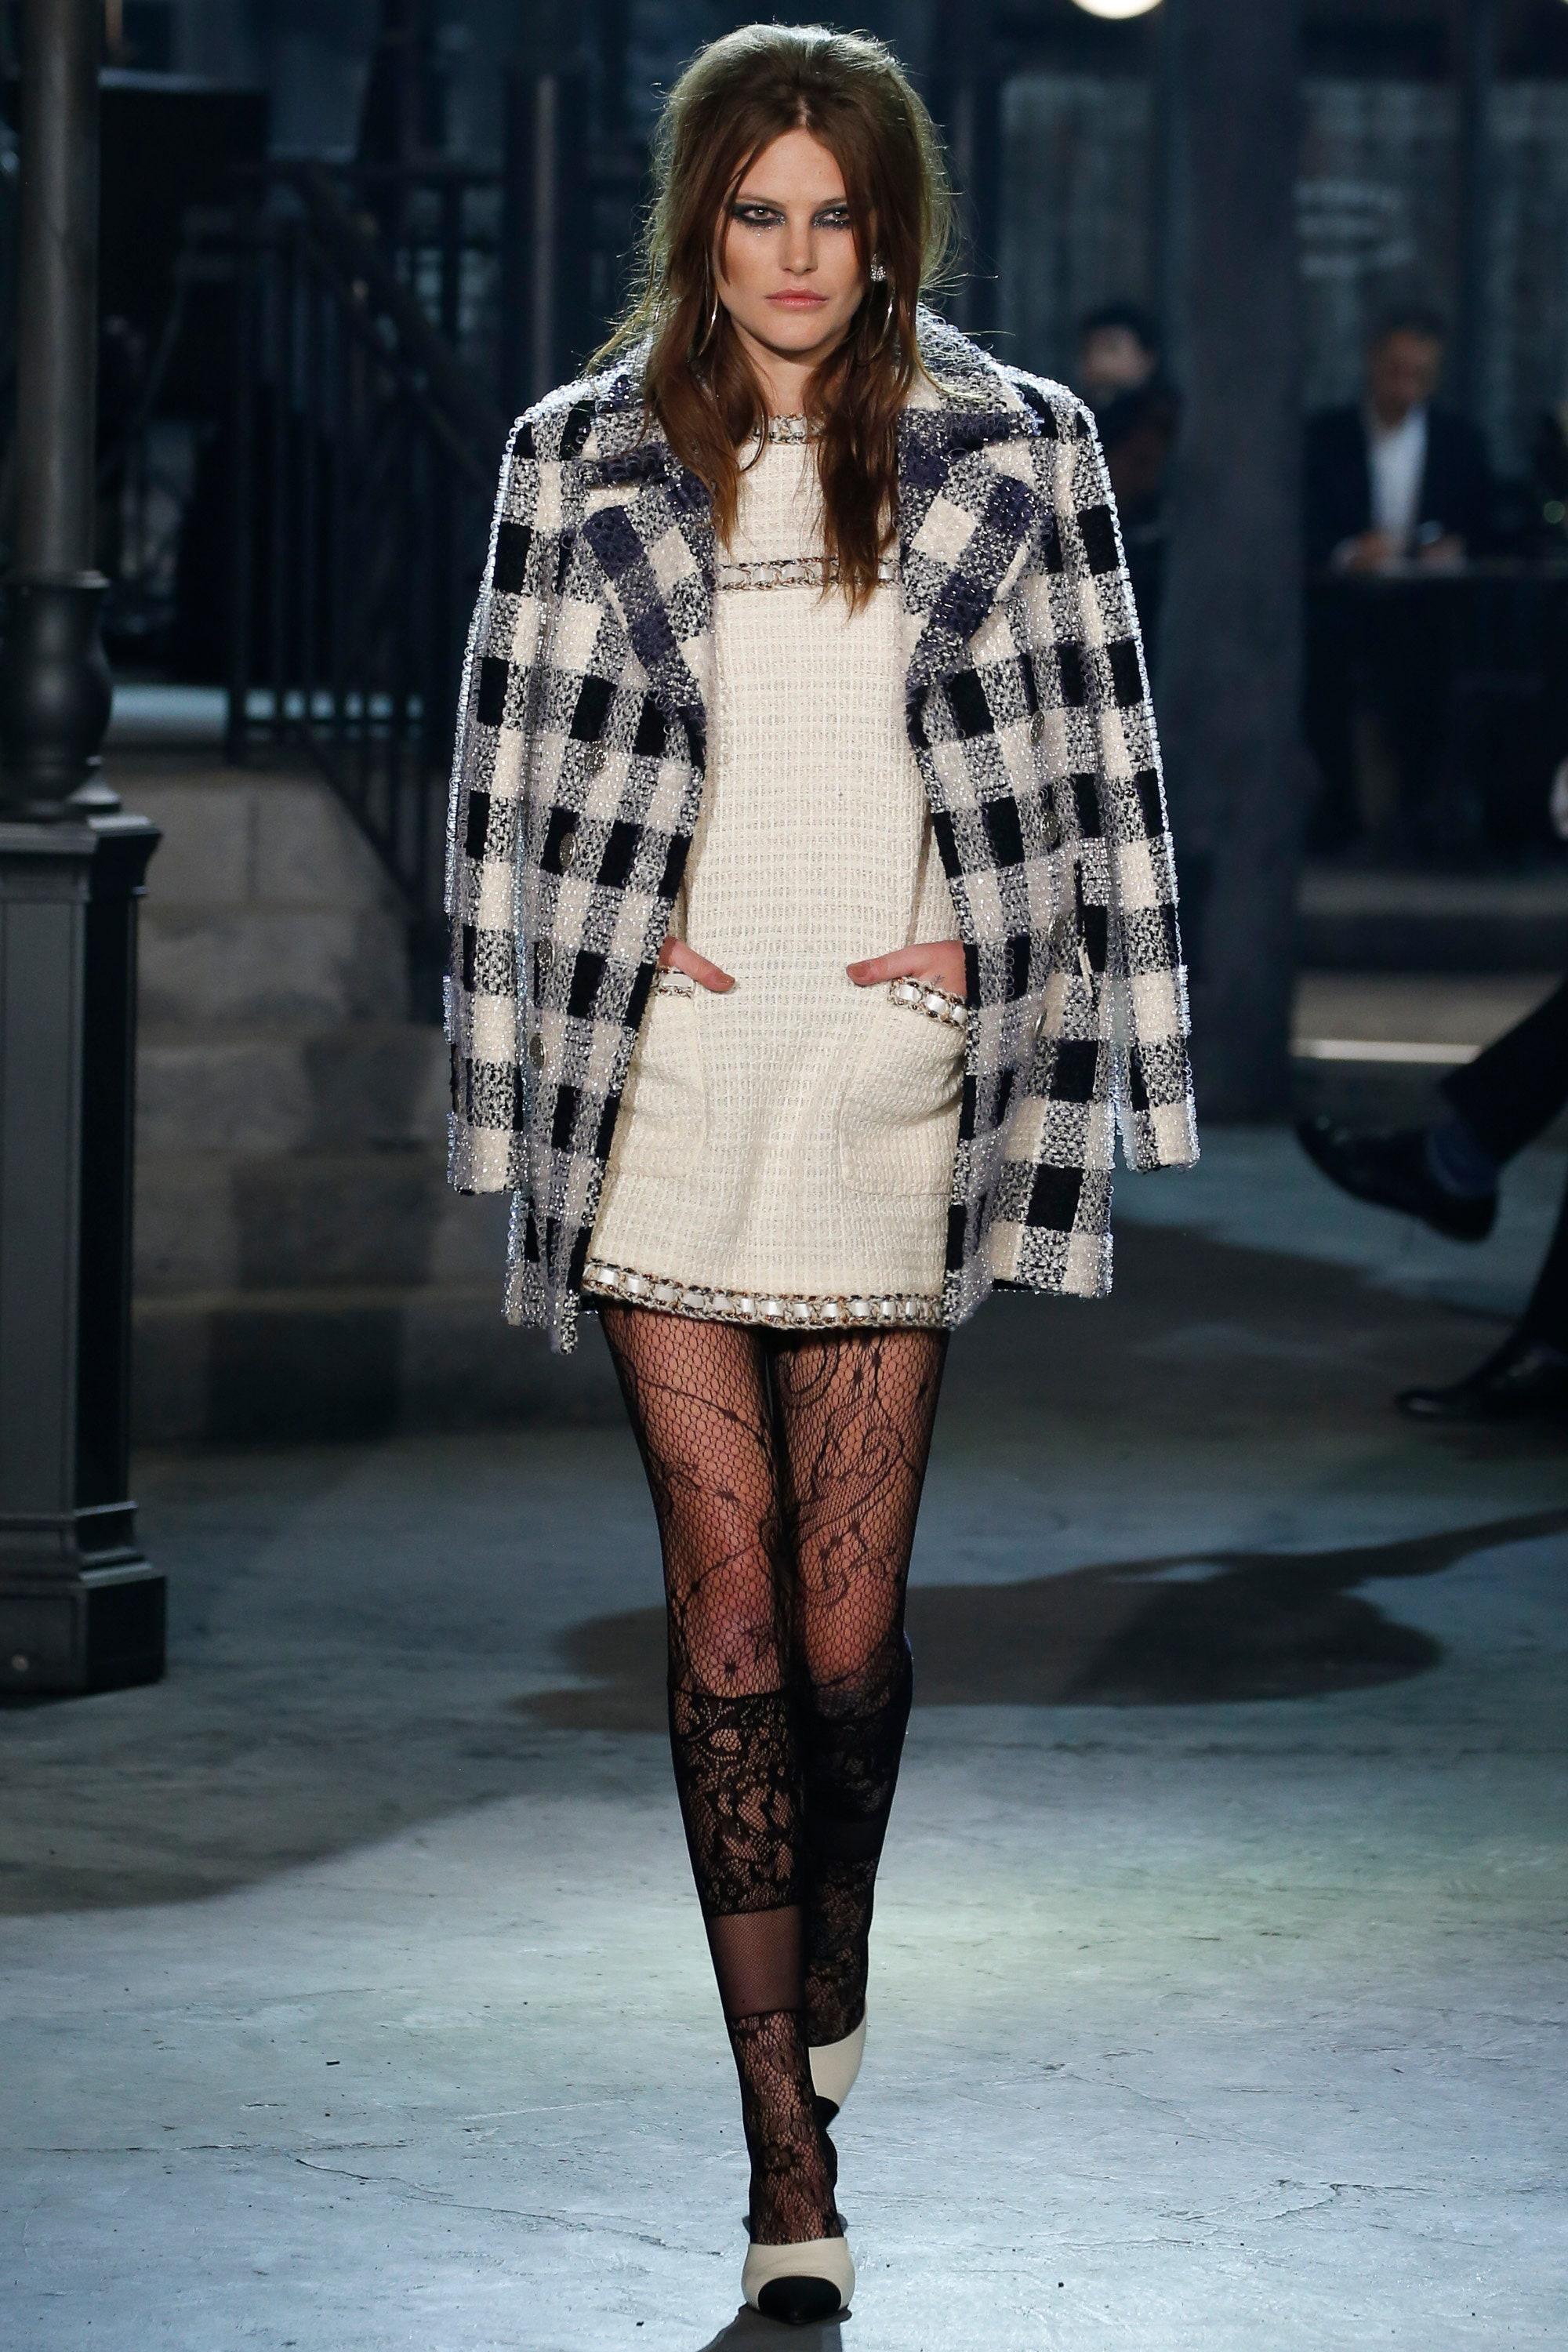 Look # 1 from Chanel Paris in ROME 2016 Pre-Fall Collection: fabulous lesage tweed checked coat.
As seen on Pharrell Williams!
Size mark 36 FR. Kept unworn. Retail price was very high -- it was a Metiers d'Art Collection (high art craftsmanship).
-